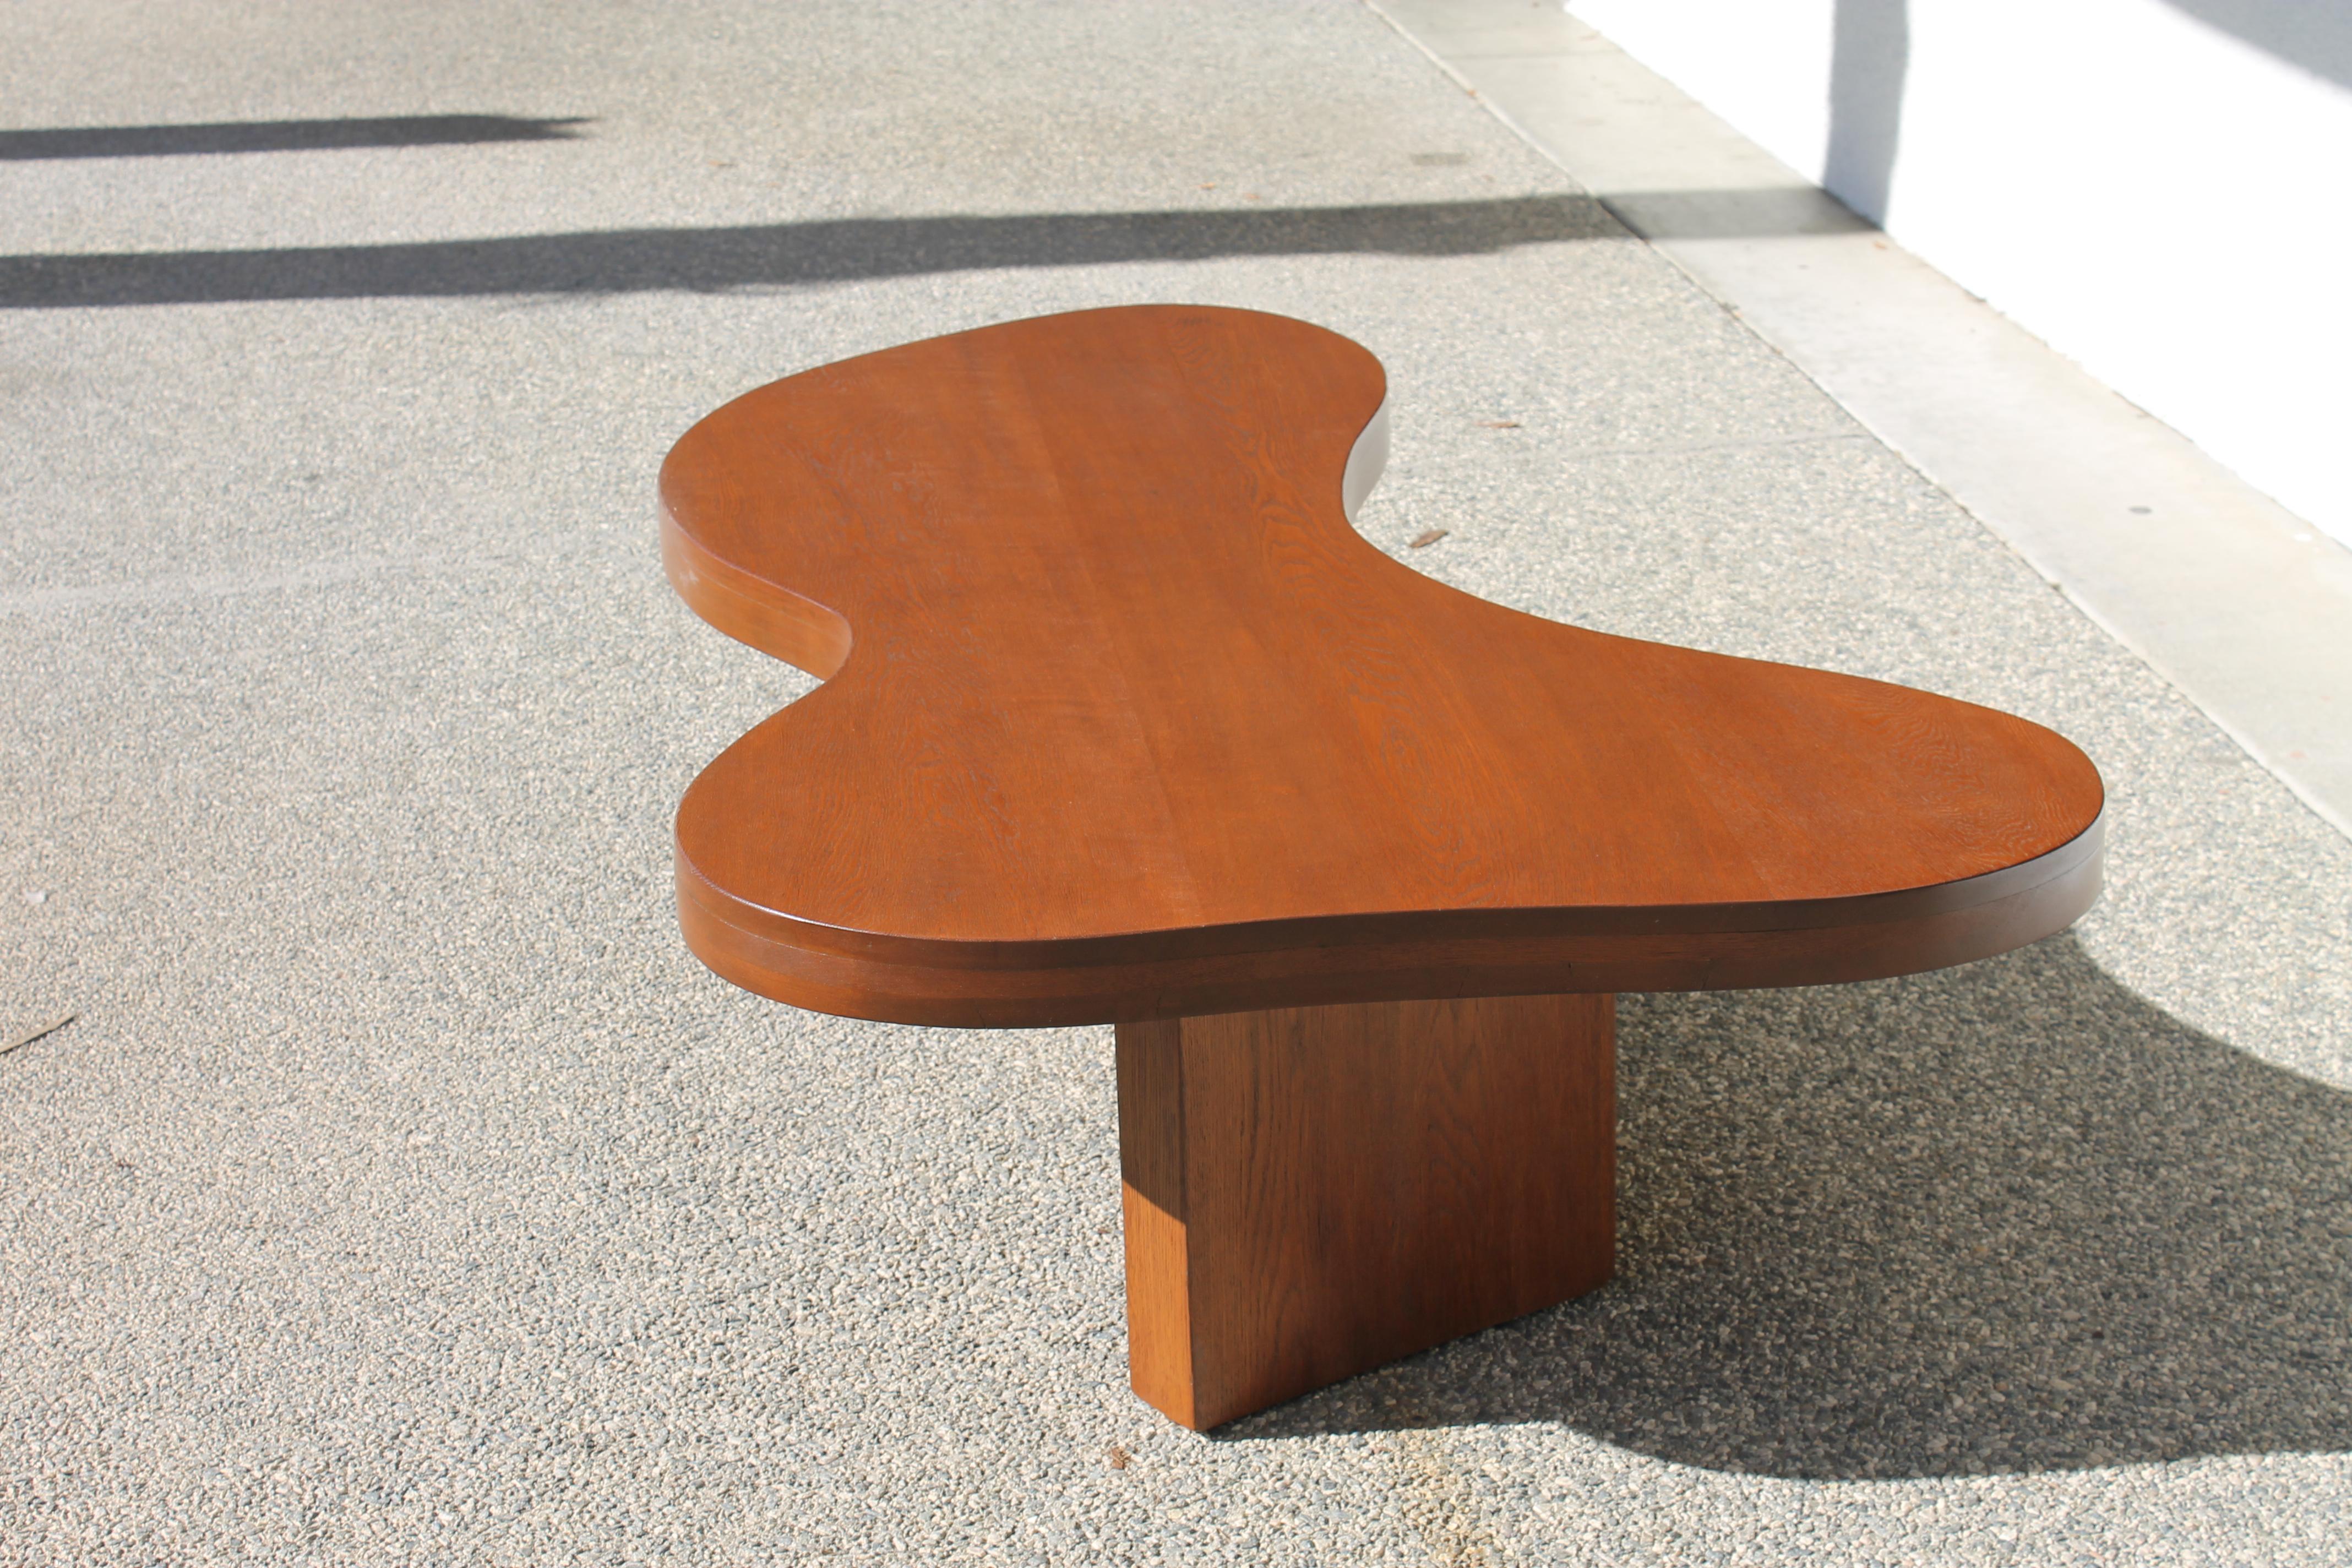 Solid oak kidney shape coffee table.  We believe this coffee table might be either John Keal for Brown Saltman or Greta Grossman for Glenn of California. Table measures 61